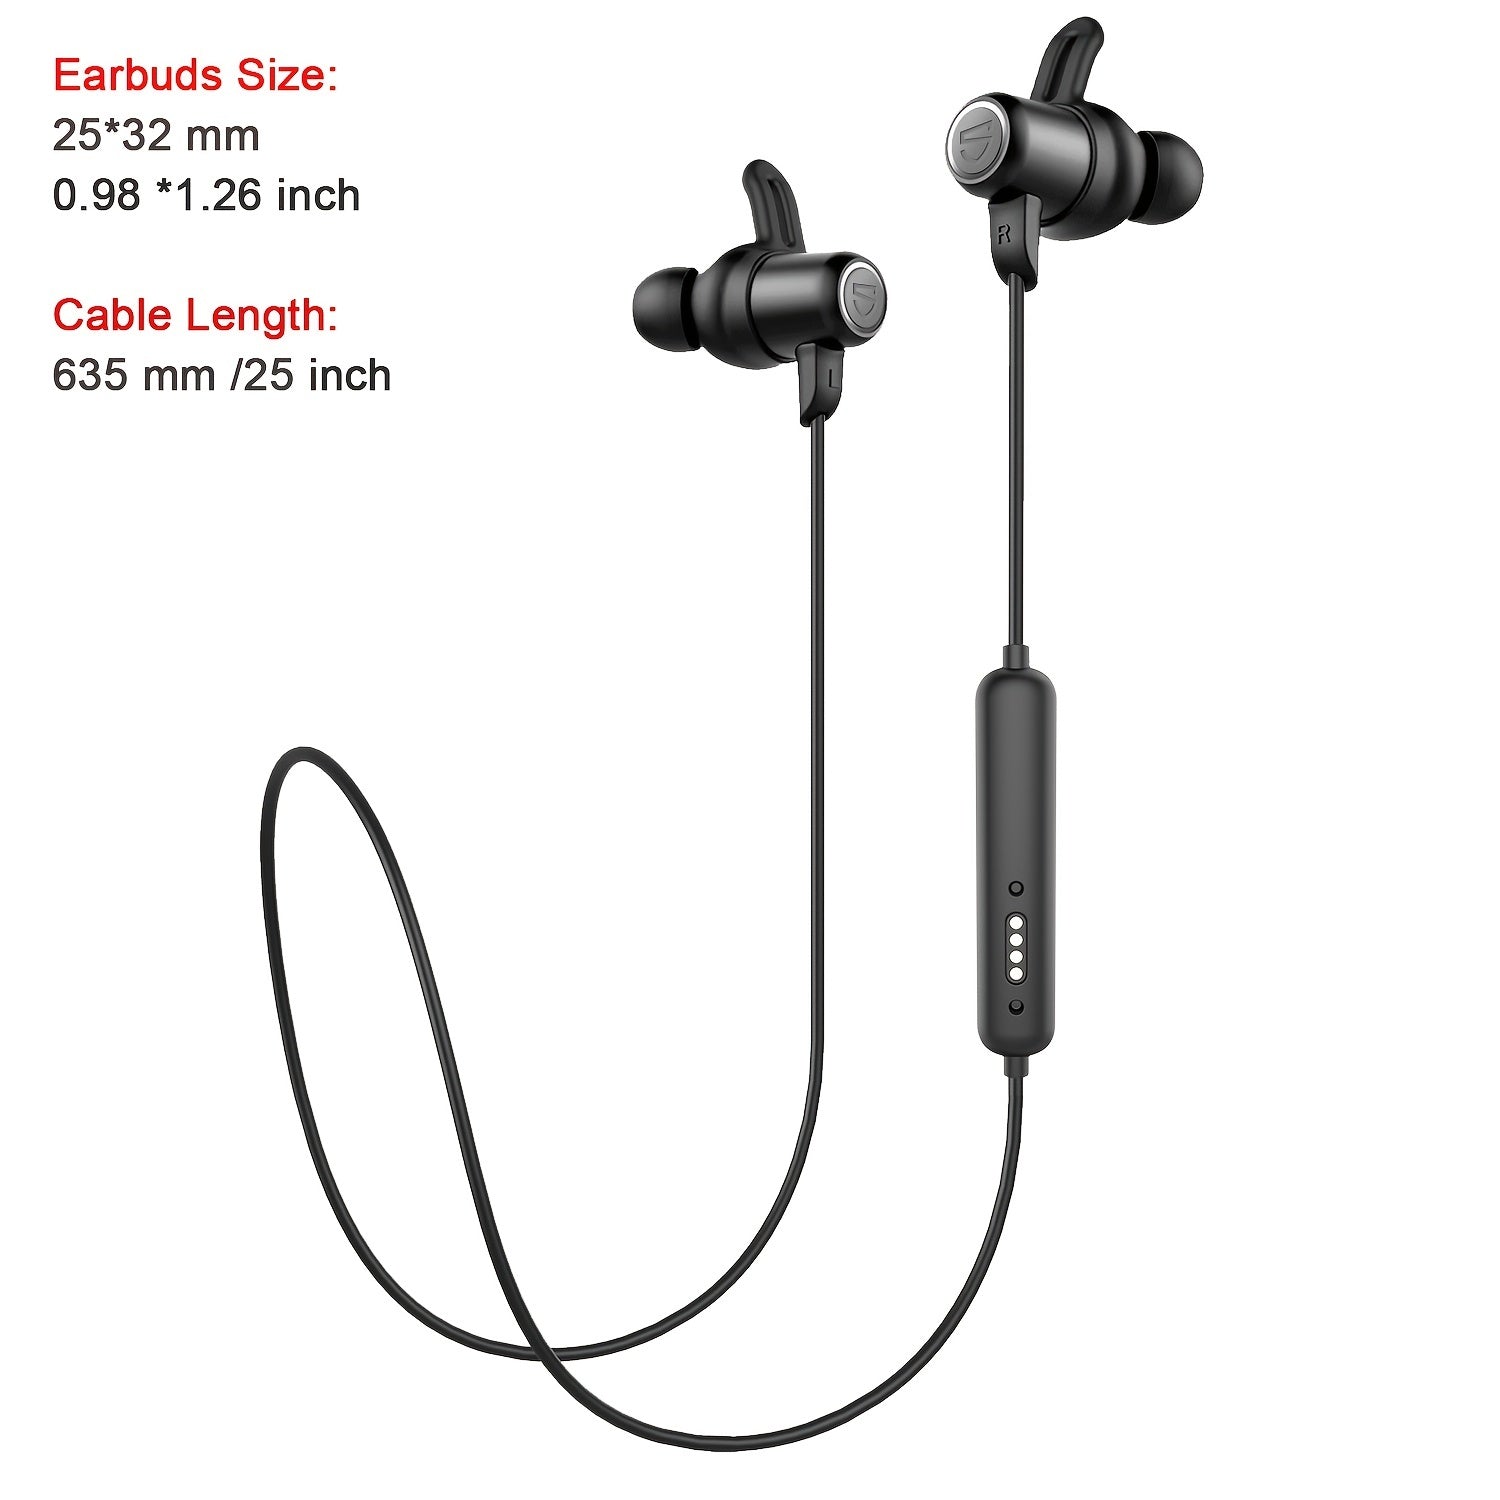 SOUNDPEATS Q35 HD Neckband BT Headphones IPX8 Waterproof Wireless Earphones For Sports In-Ear Stereo BT 5.0 Earbuds With Magnetic Charger Built-in Mic CVC 6.0 14 Hours Playtime